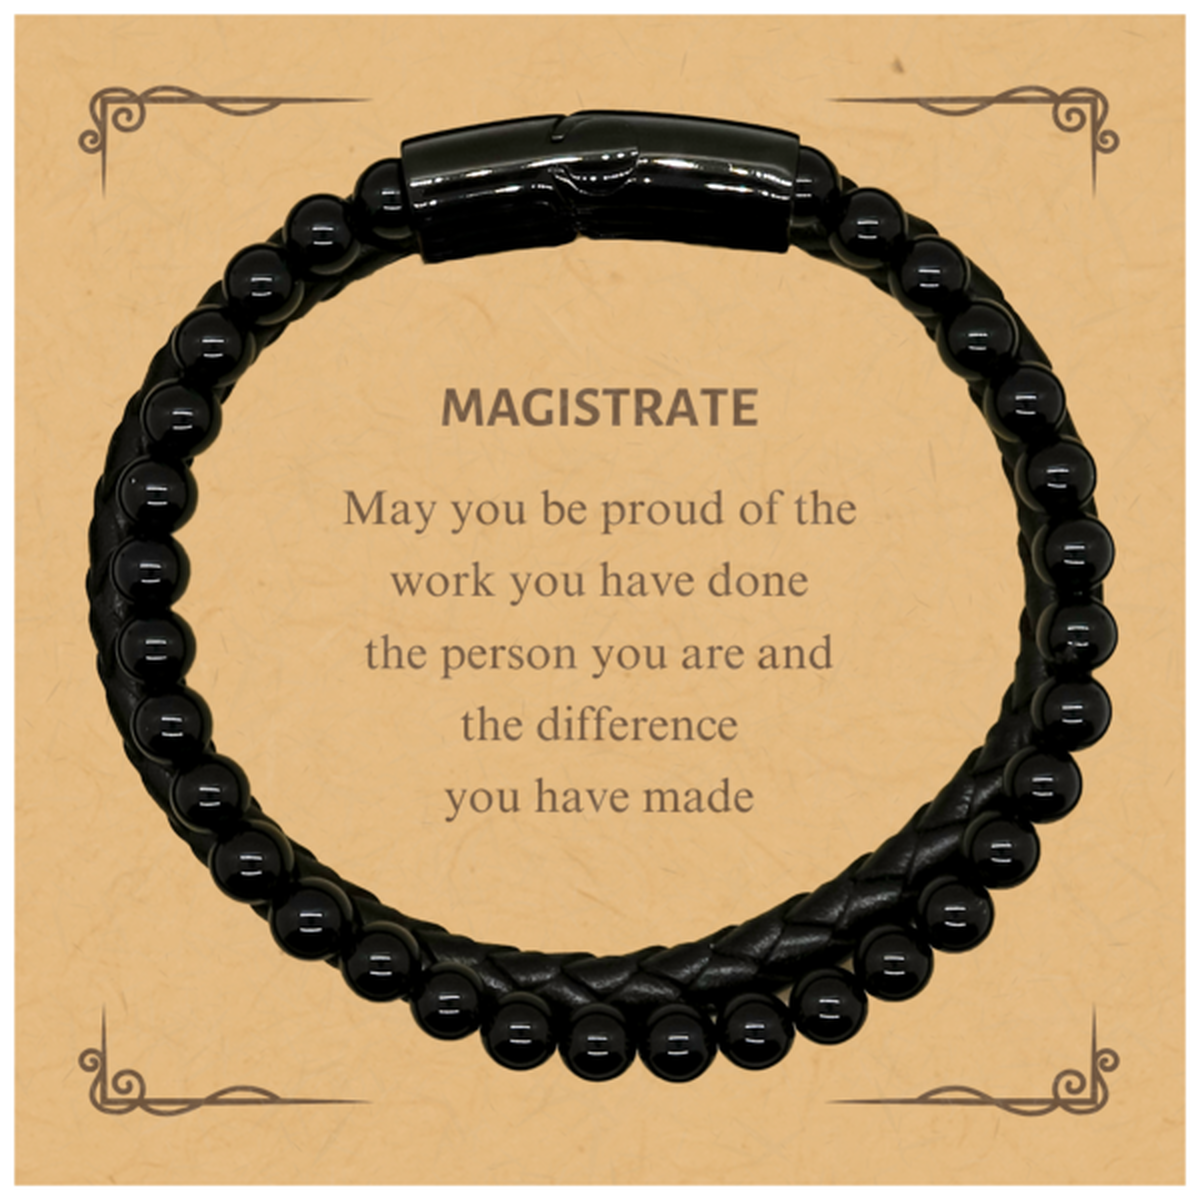 Magistrate May you be proud of the work you have done, Retirement Magistrate Stone Leather Bracelets for Colleague Appreciation Gifts Amazing for Magistrate